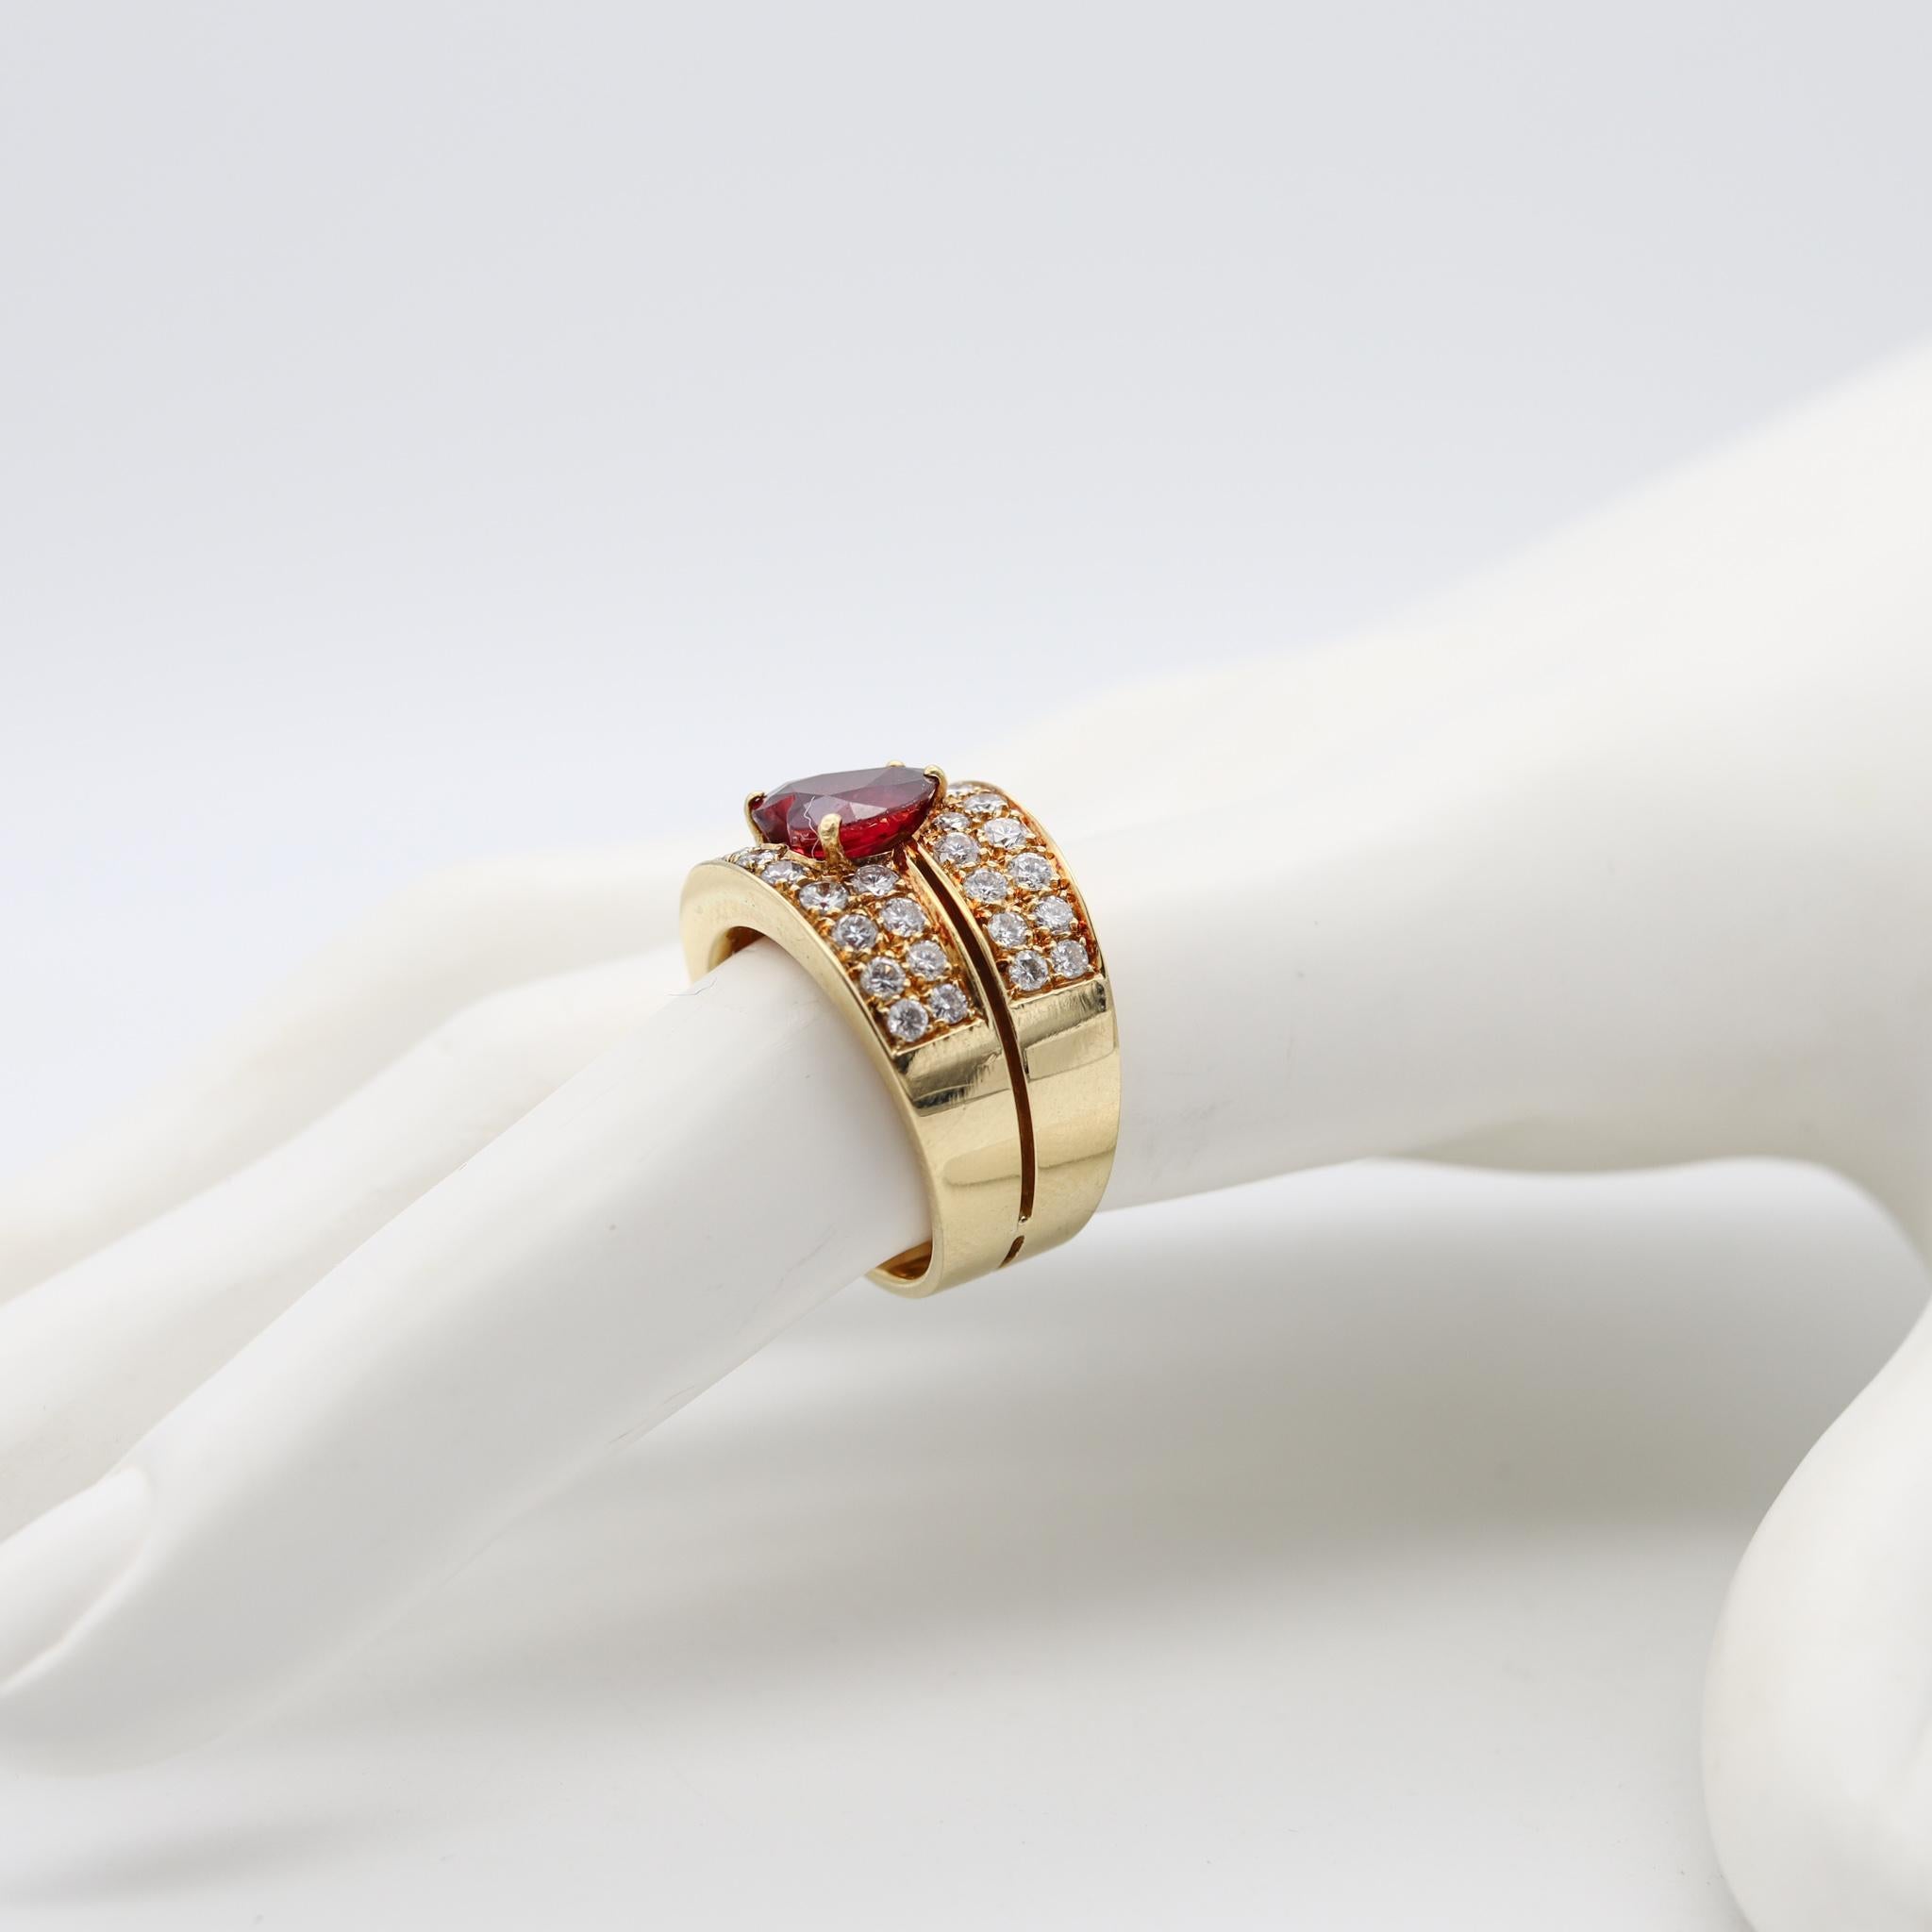 Women's Gia Certified Cocktail Ring 18Kt Yellow Gold 4.11 Ct Heart Cut Red Ruby Diamonds For Sale